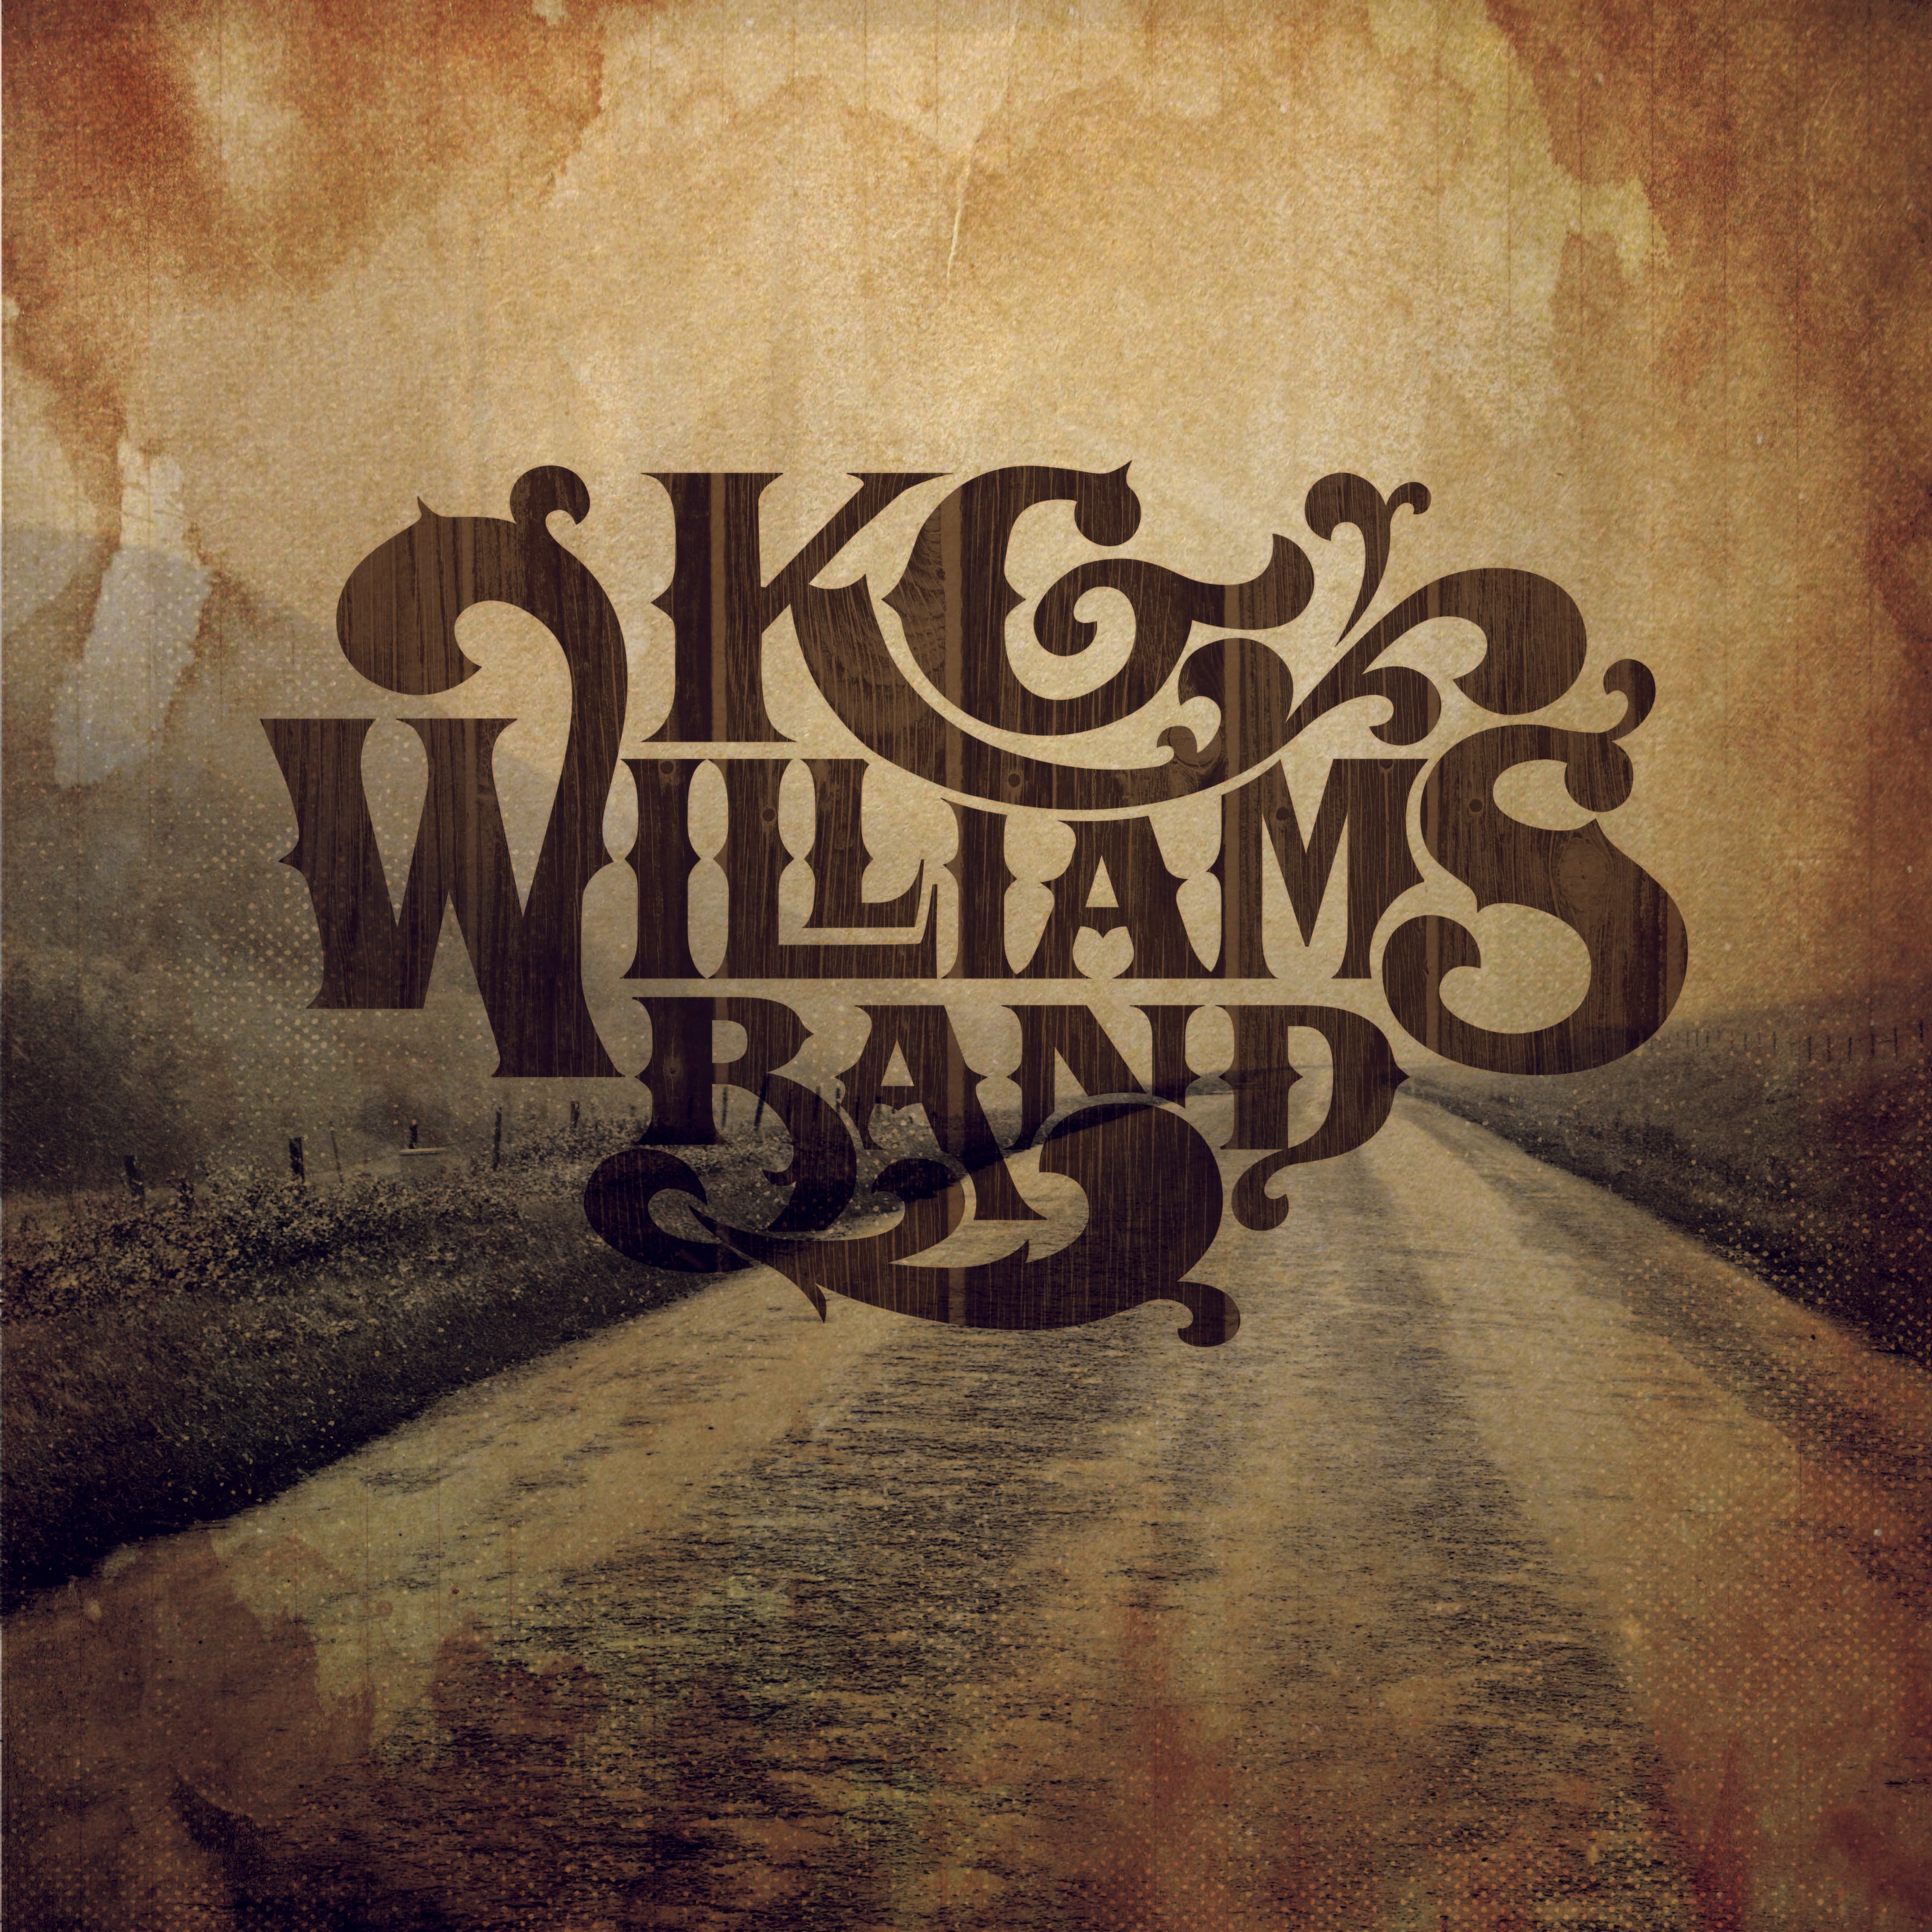 KG Williams Band